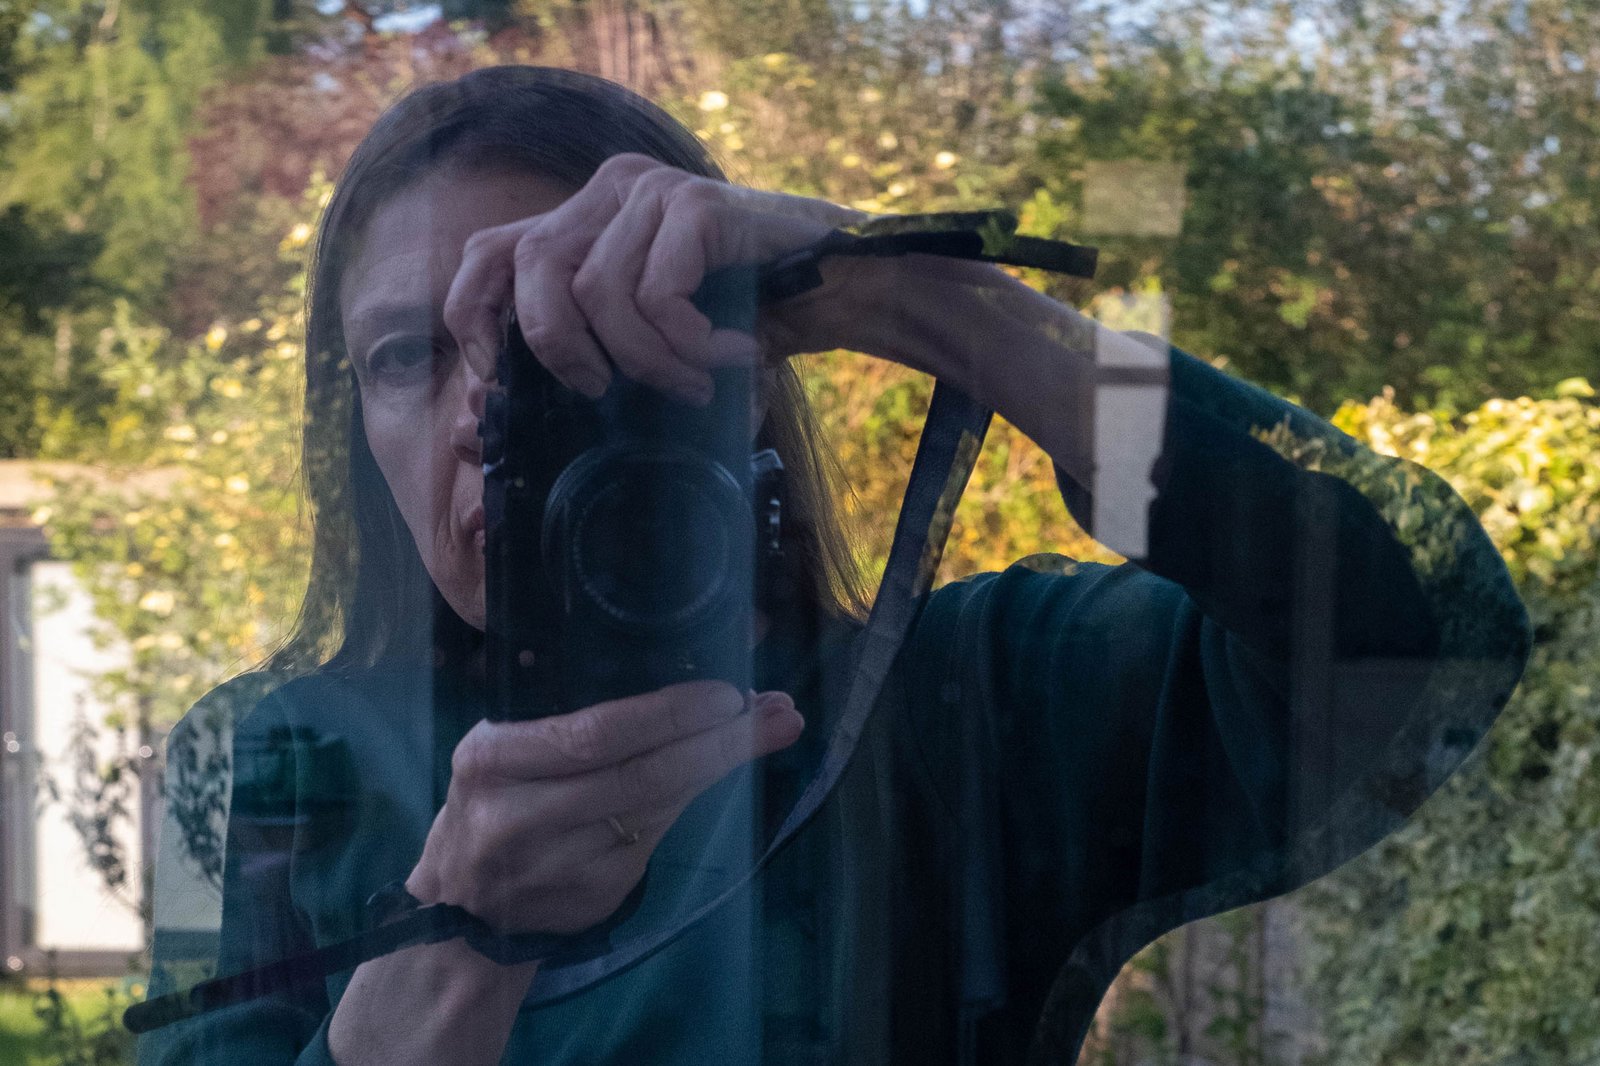 Karren Visser in green long-sleeve T-shirt reflected in window holding camera close so that one half of her face is concealed. A brightly lit garden is behind her.